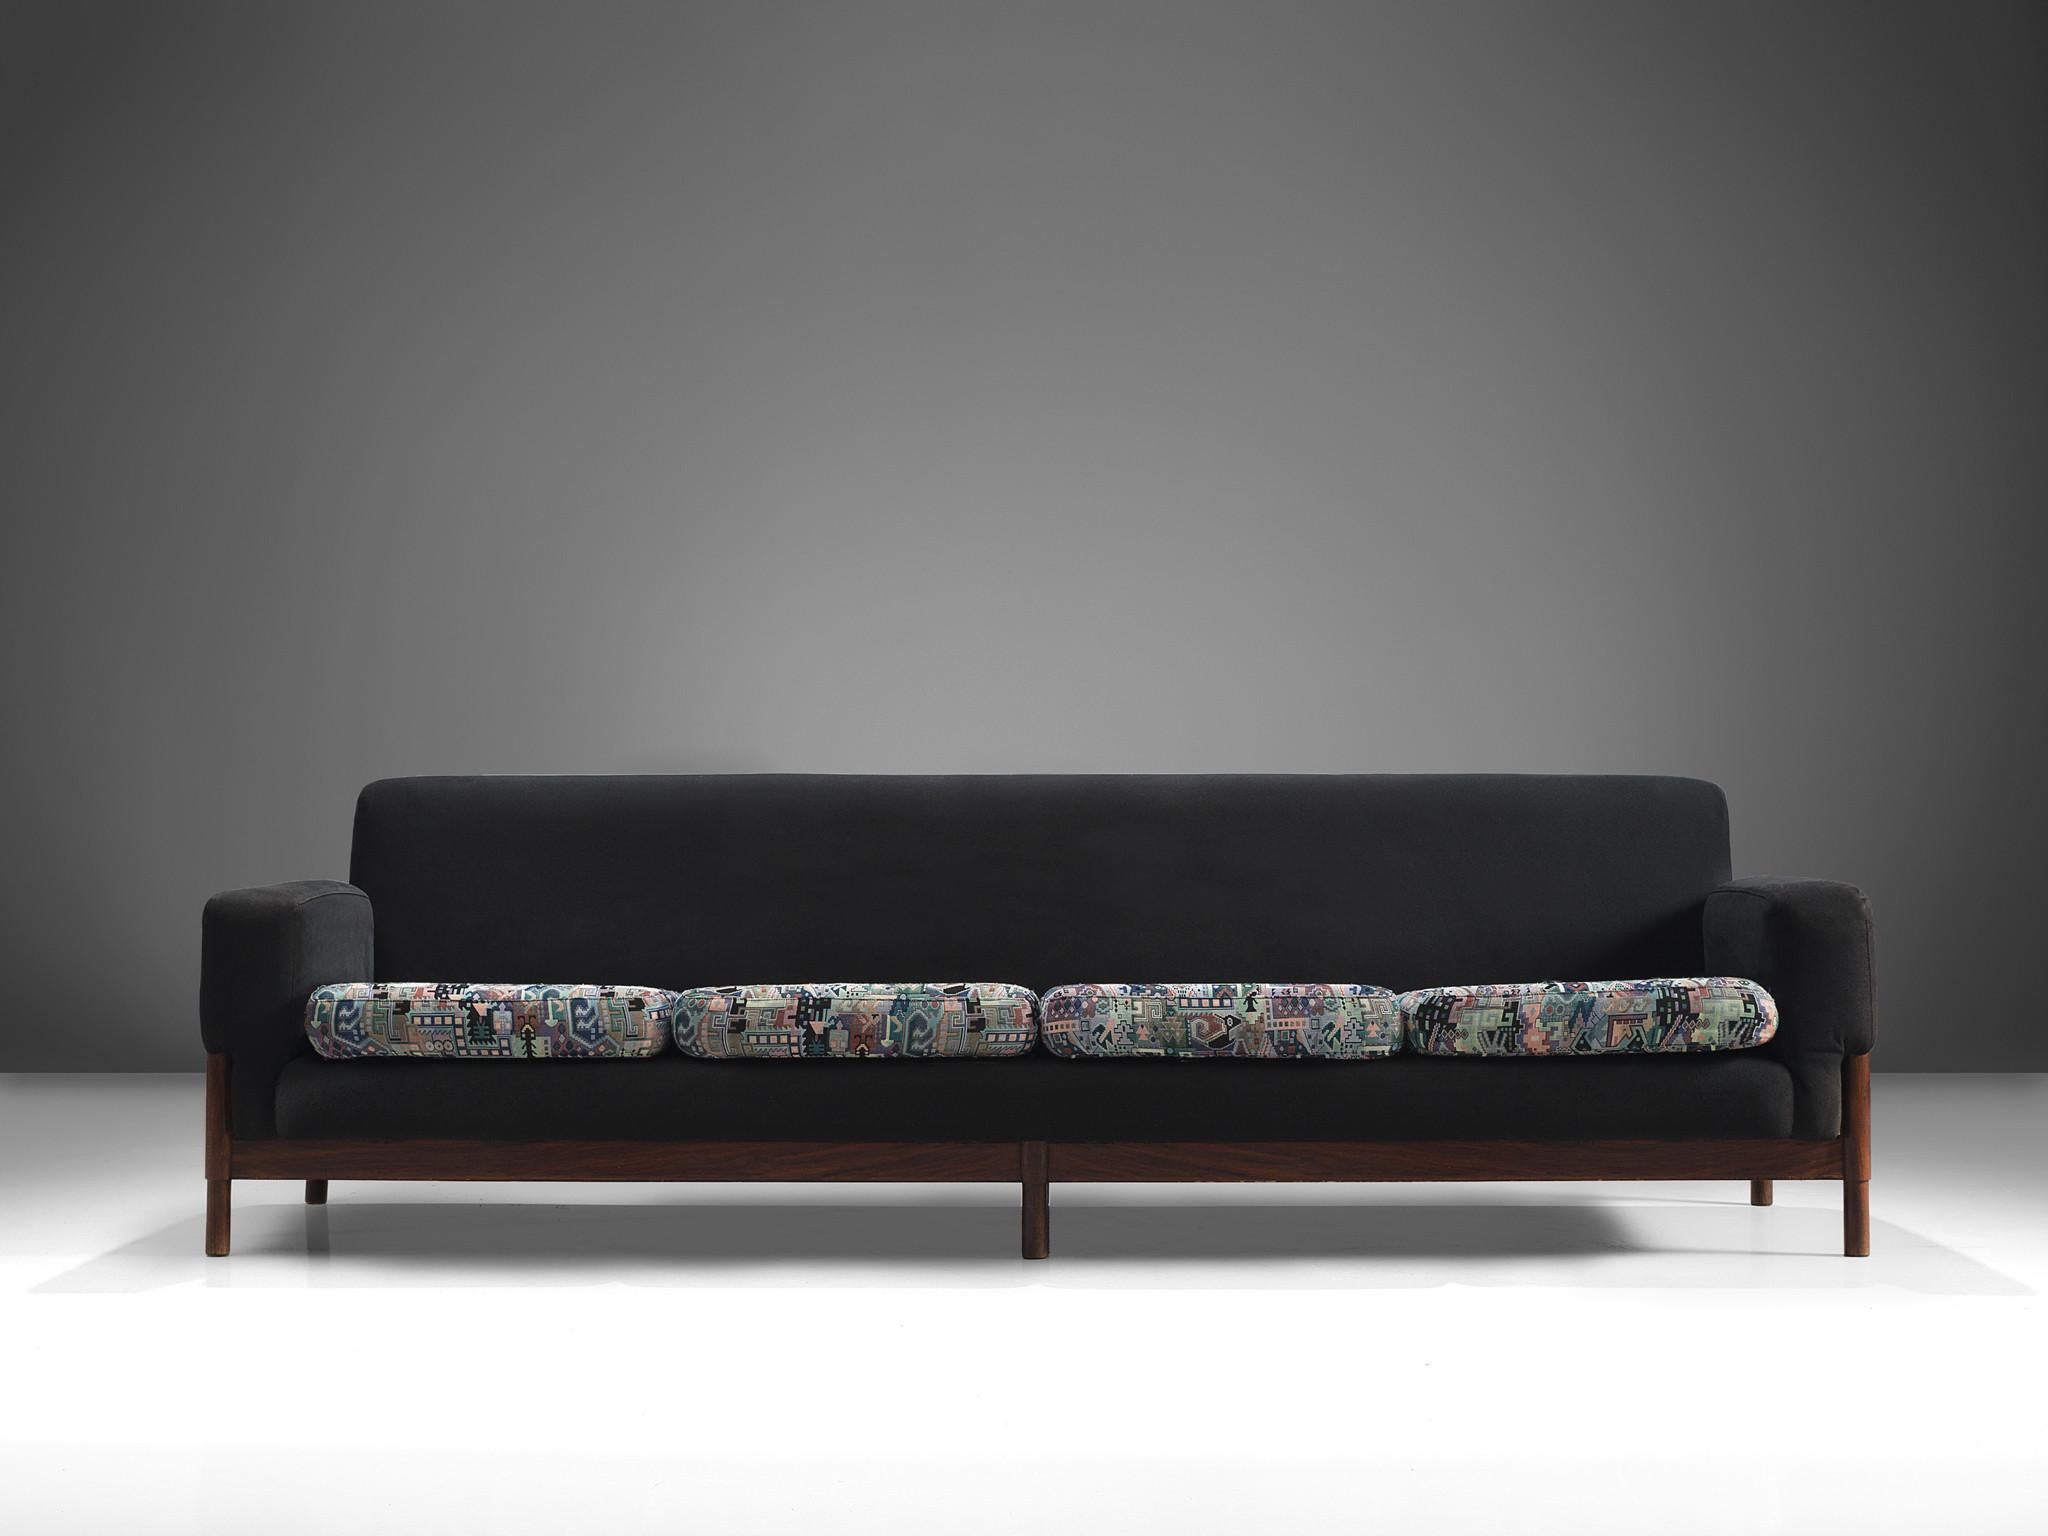 Saporiti, four-seat sofa, rosewood, fabric, Italy, circa 1950.

This sofa is equipped with a rosewood frame and a graphic pattern on the seat and a black fabric on the rest of the chair. The sofa is designed in a modest, yet distinguished look.